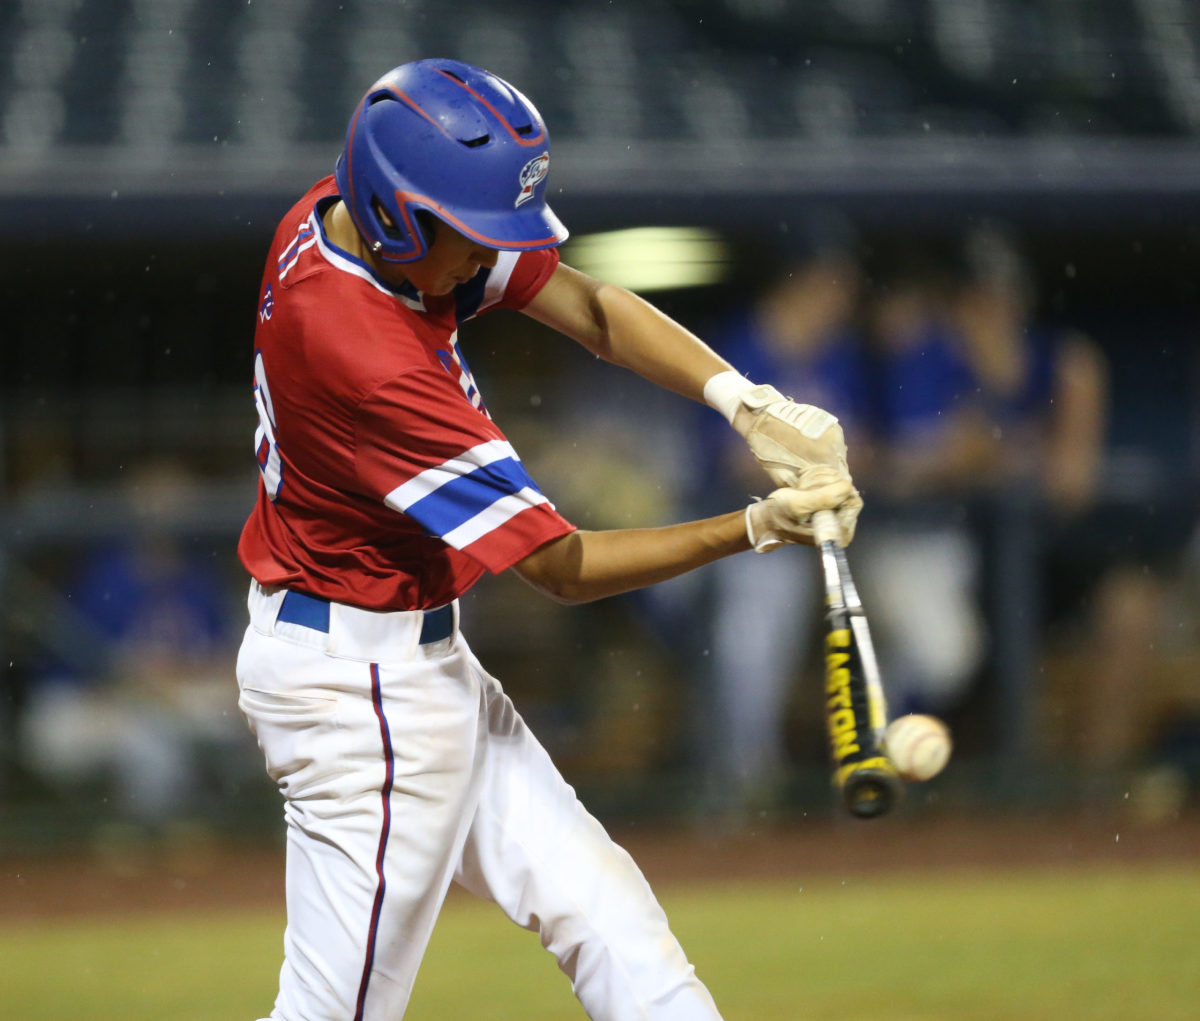 Saltillo and Pascagoula played in game 1 of the MHSAA Class 5A Baseball Championship on Tuesday, June 1, 2021 at Trustmark Park. Photo by Keith Warren